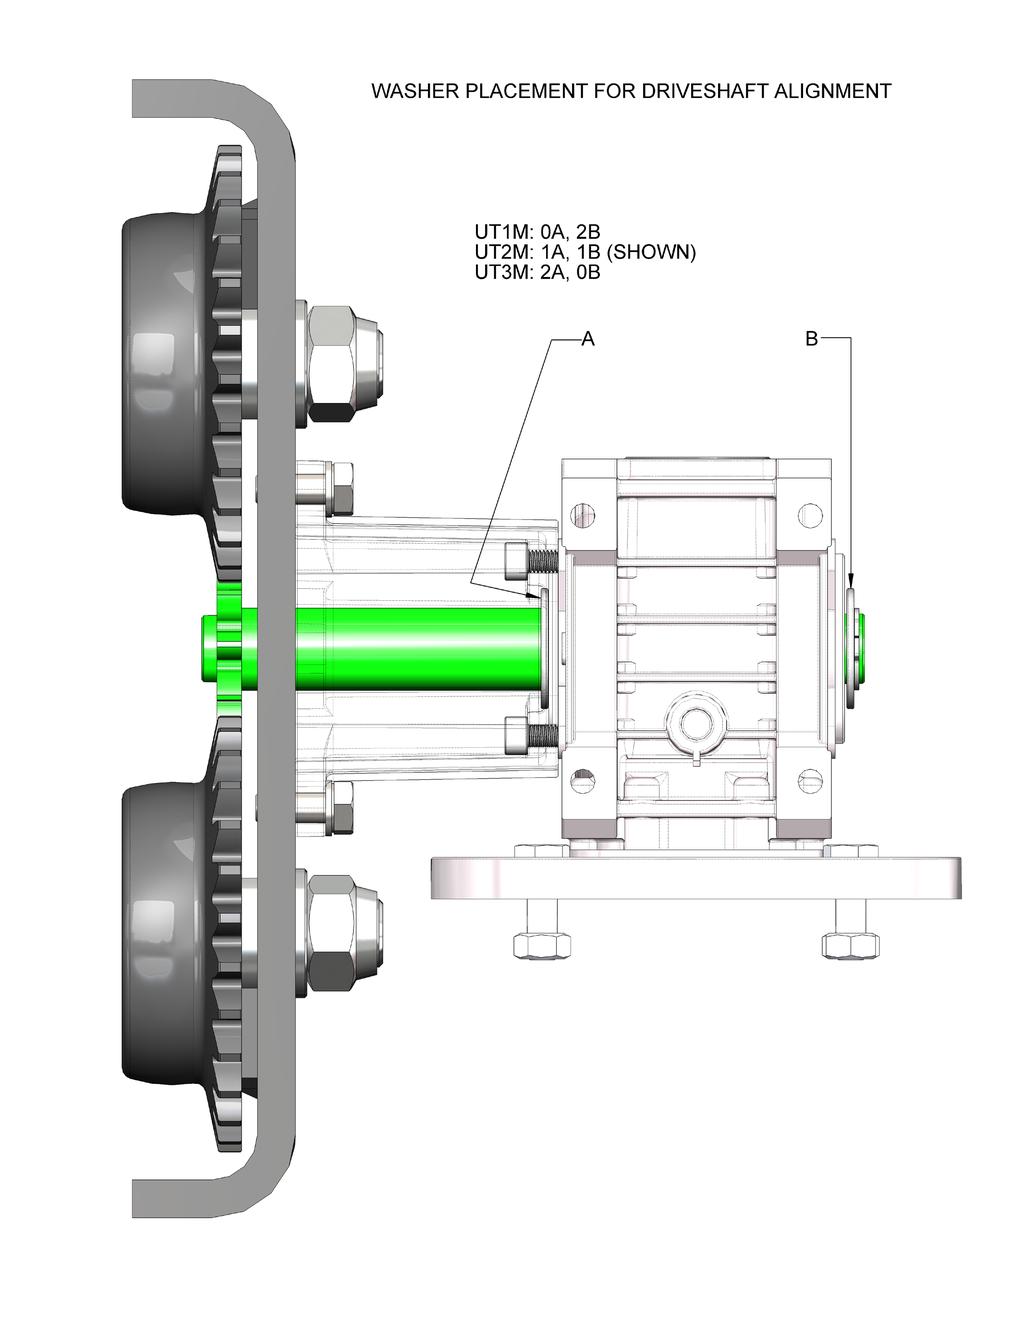 WASHER PLACEMENT FOR DRIVESHAFT ALIGNMENT The same drive assembly components are used no matter the UTM frame size.